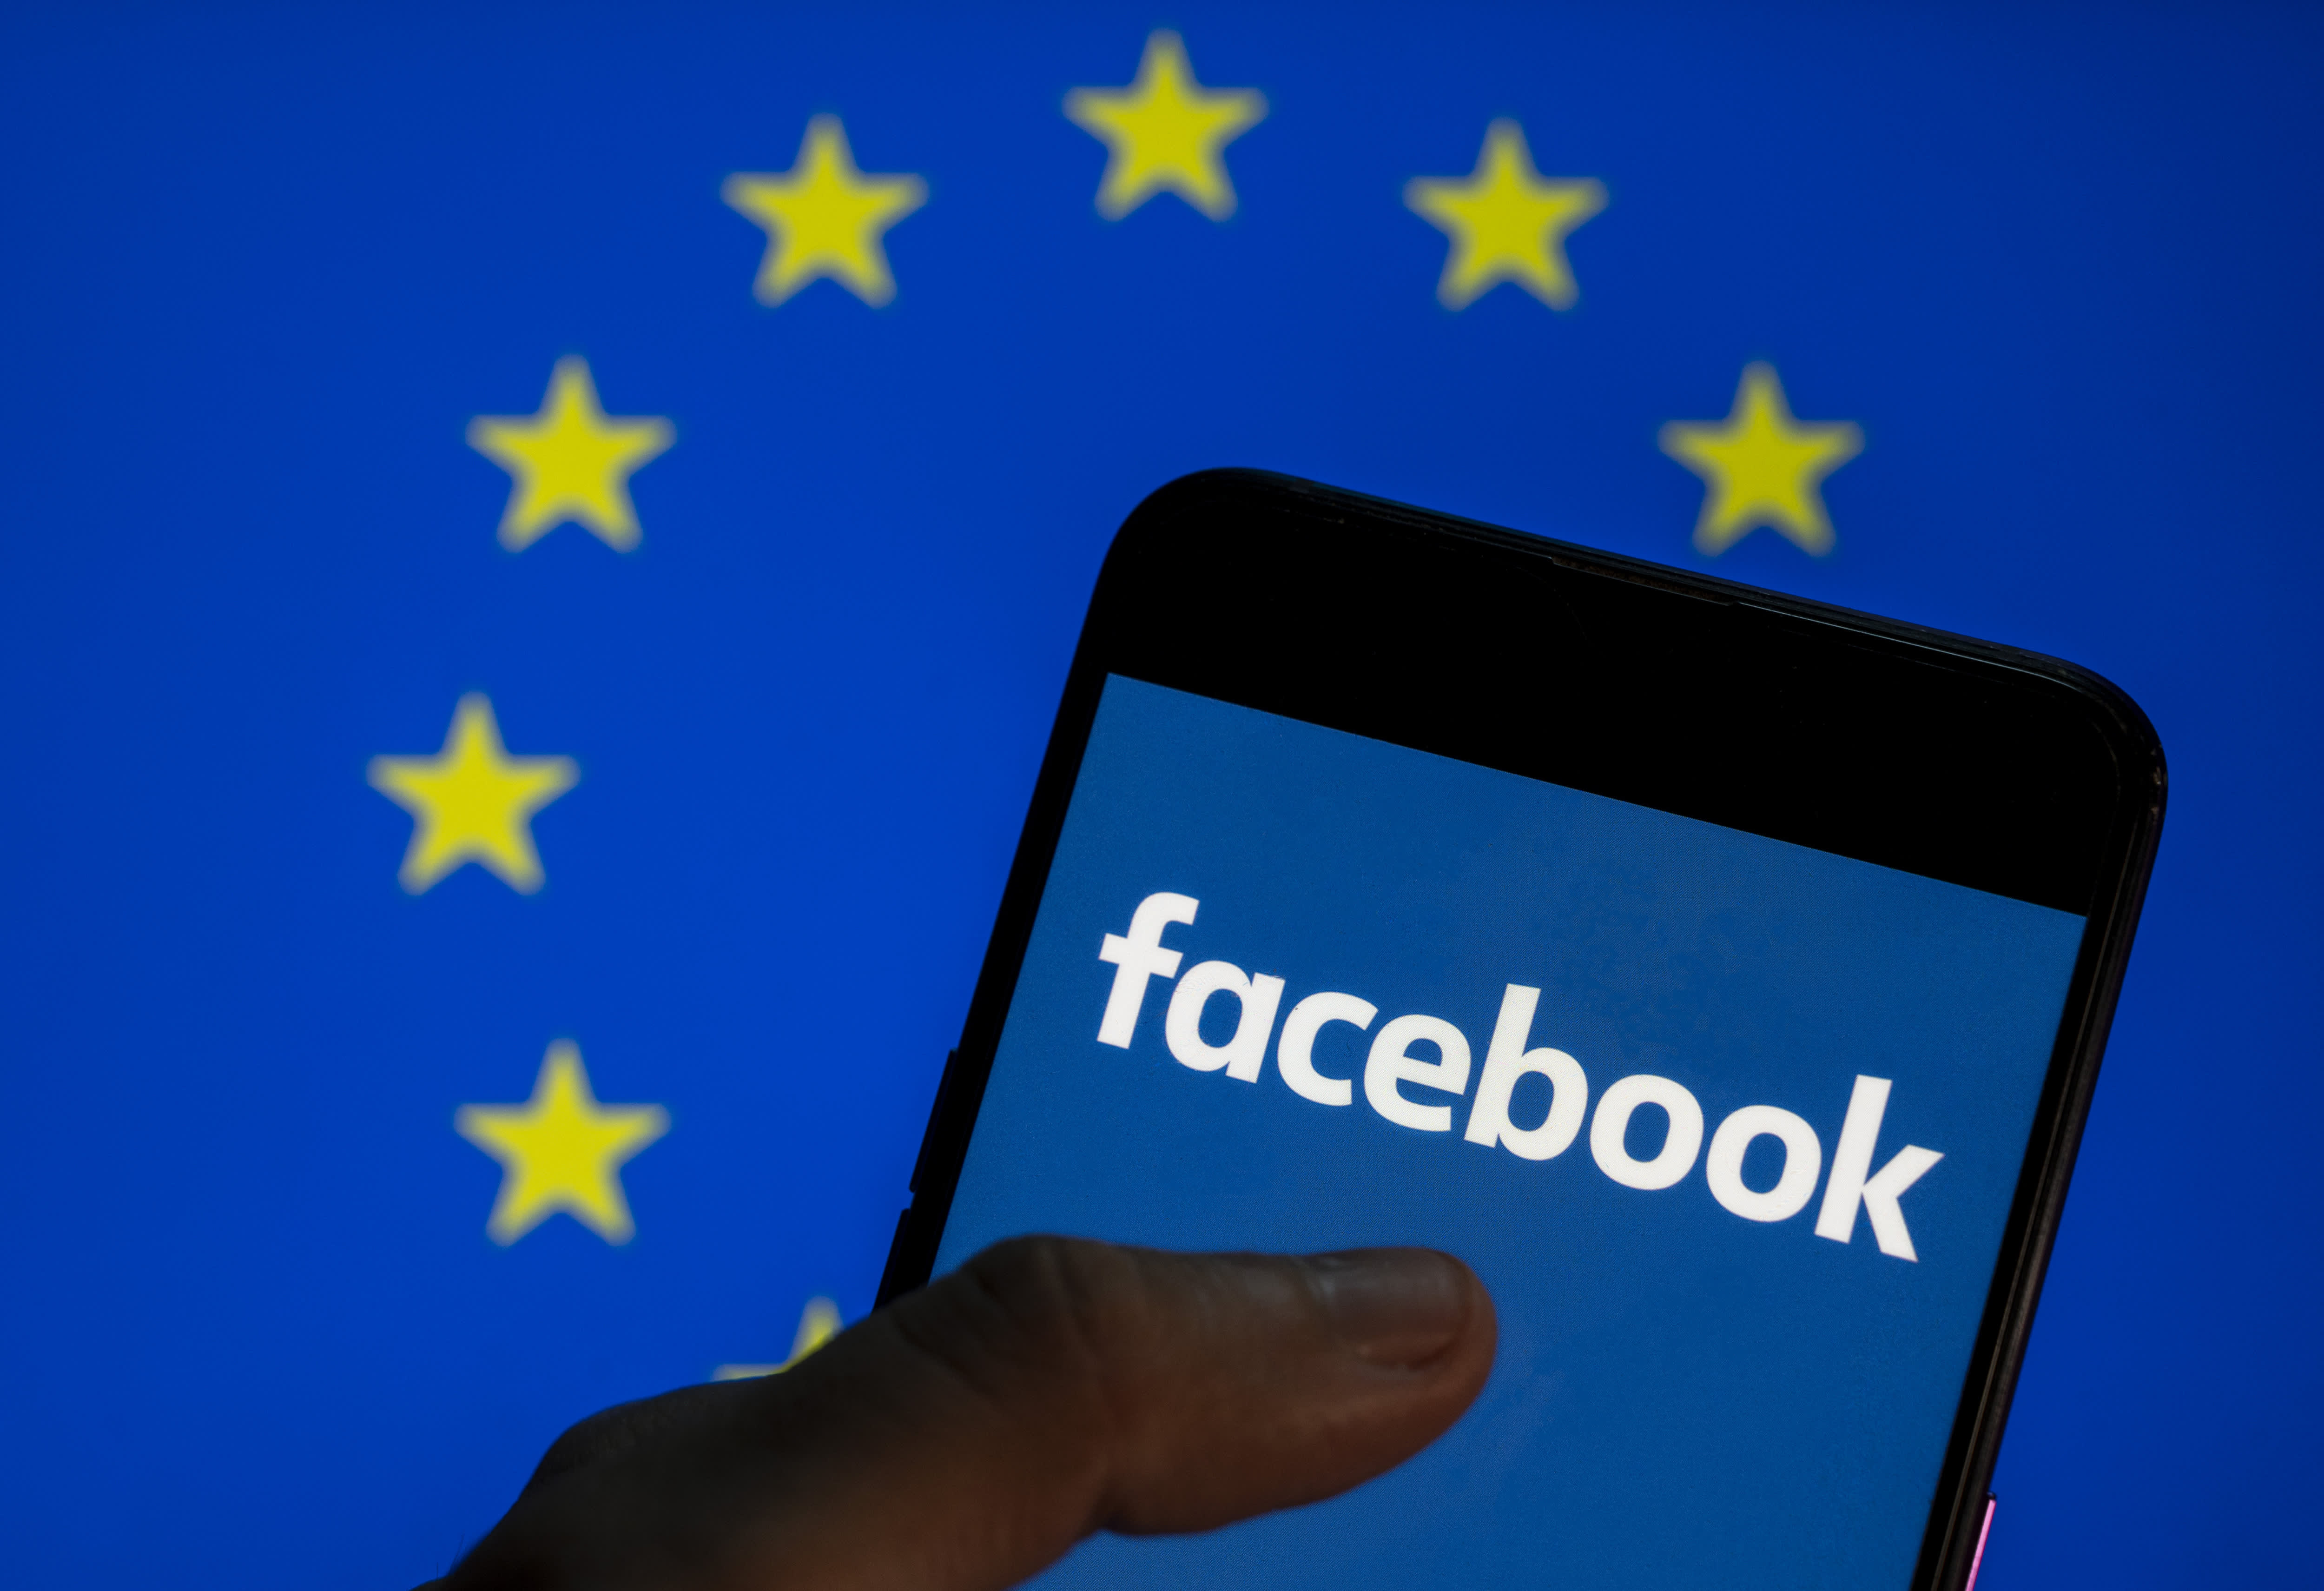 Facebook hit with new antitrust probes in the UK and EU